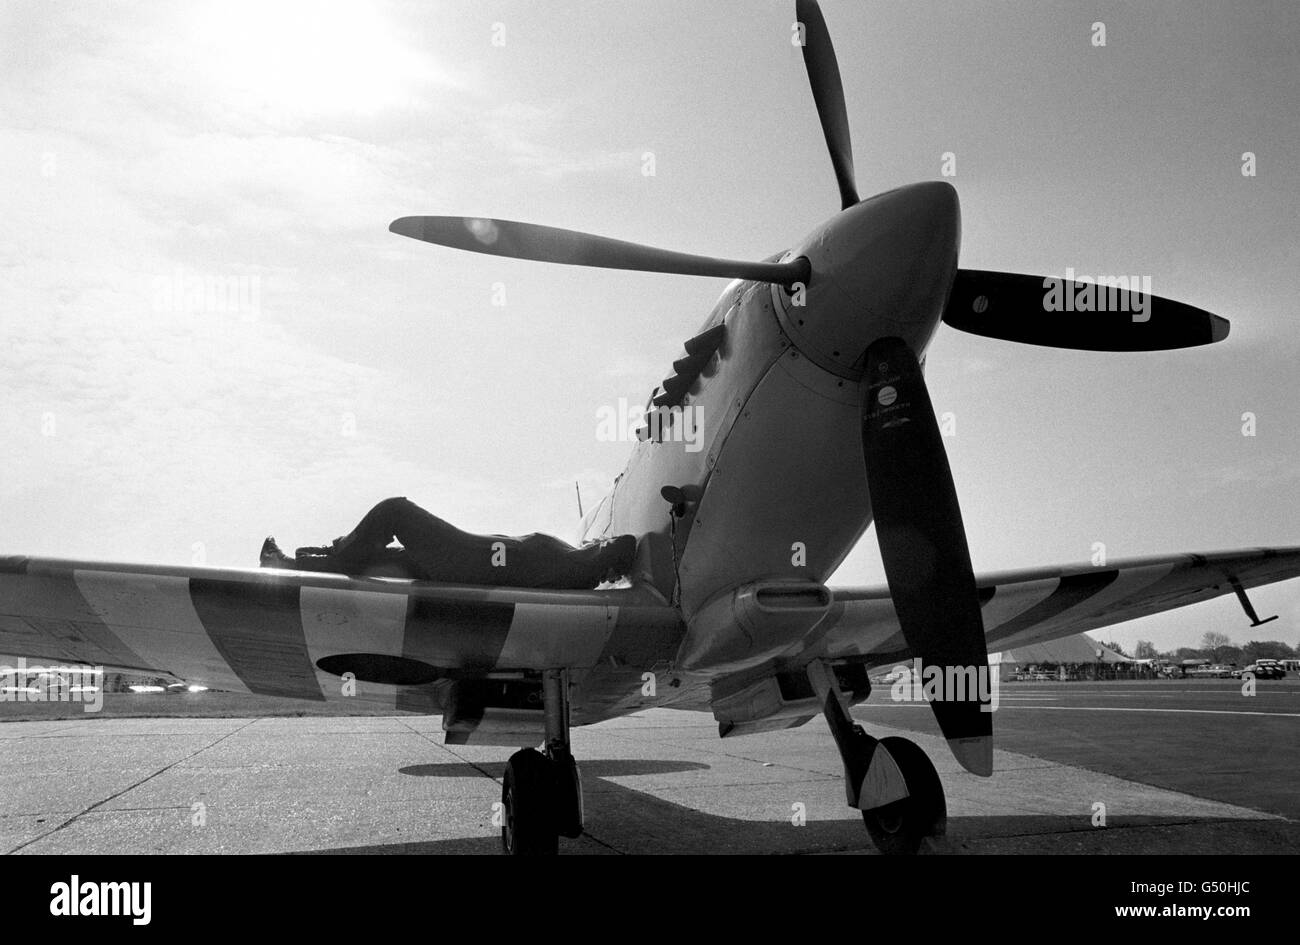 Jim Kennedy finds a suitable place to catch the sun on the wing of this vintage Spitfire. The World War Two aircraft is one of many on display at the Biggin Hill International Air Fair Stock Photo